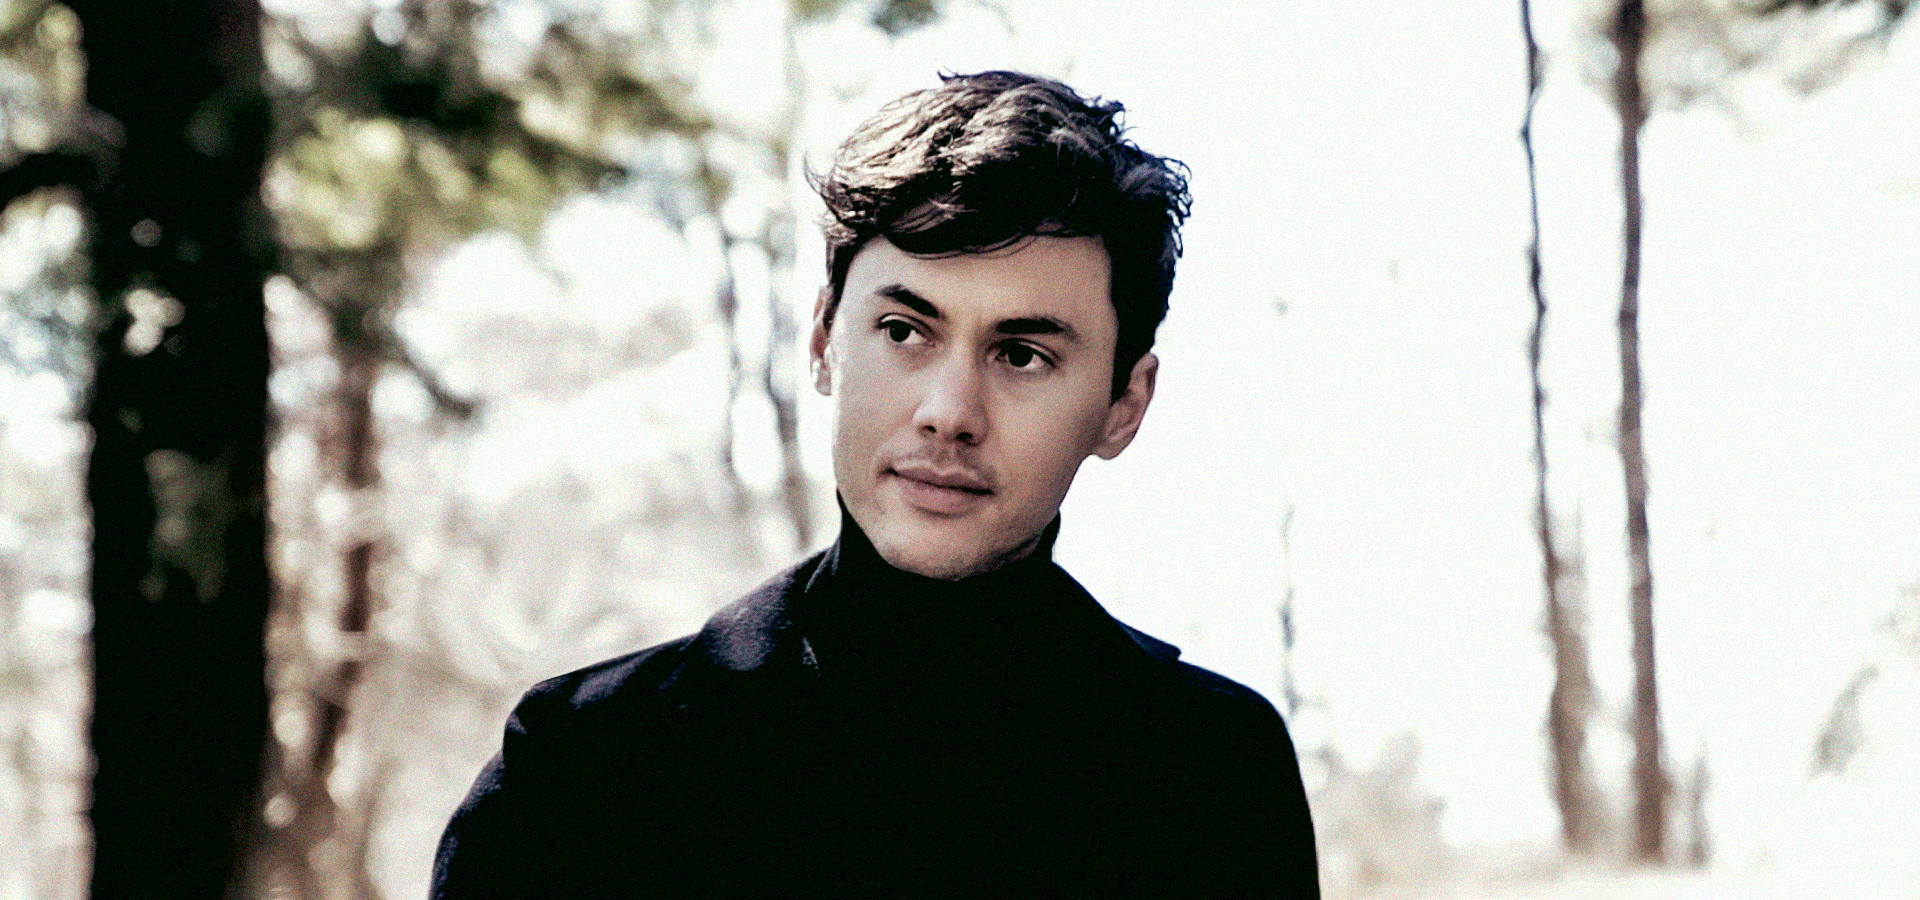 A portrait photo of violinist Benjamin Beilman, a young man wearing a black suit and turtleneck.